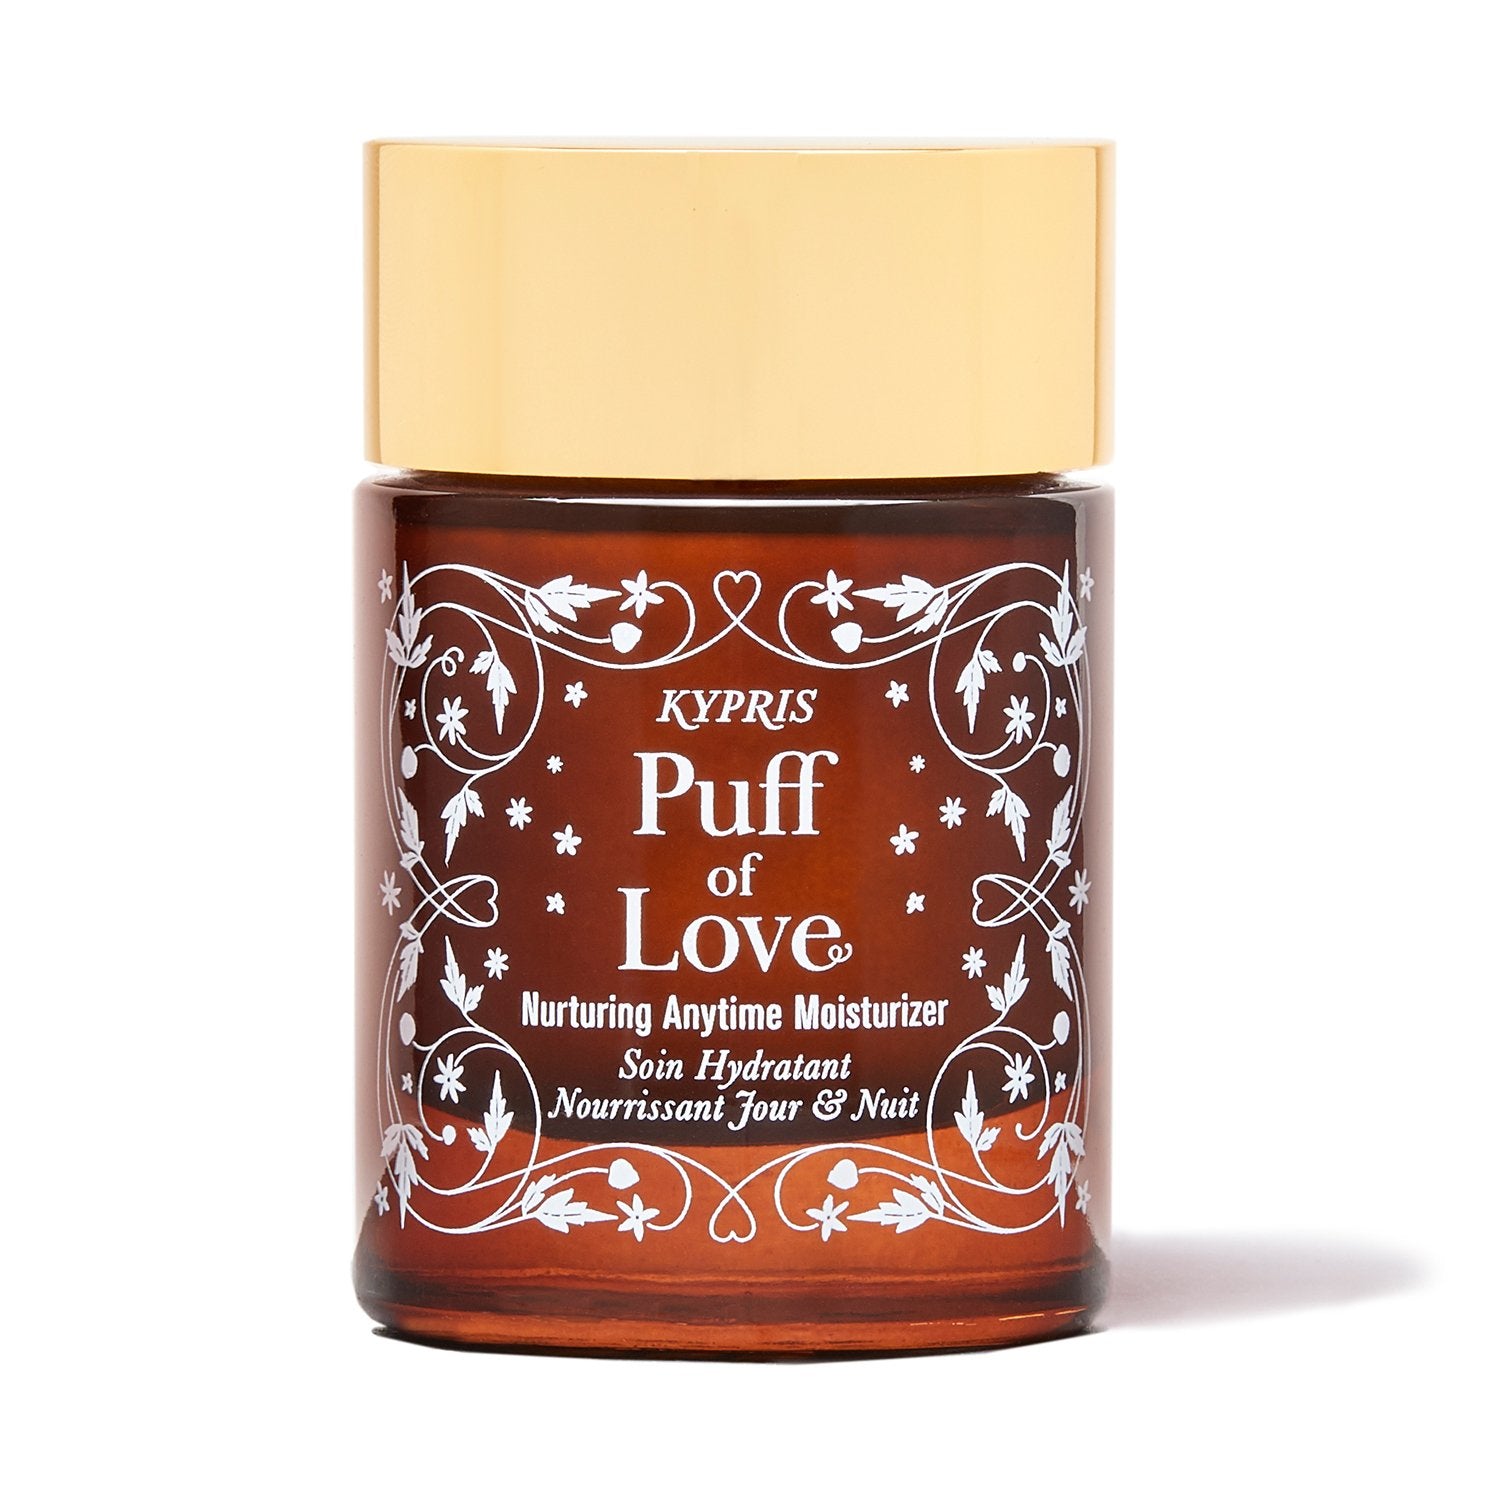 Puff of Love Moisturizer, in amber glass jar with gold lid, on white background.